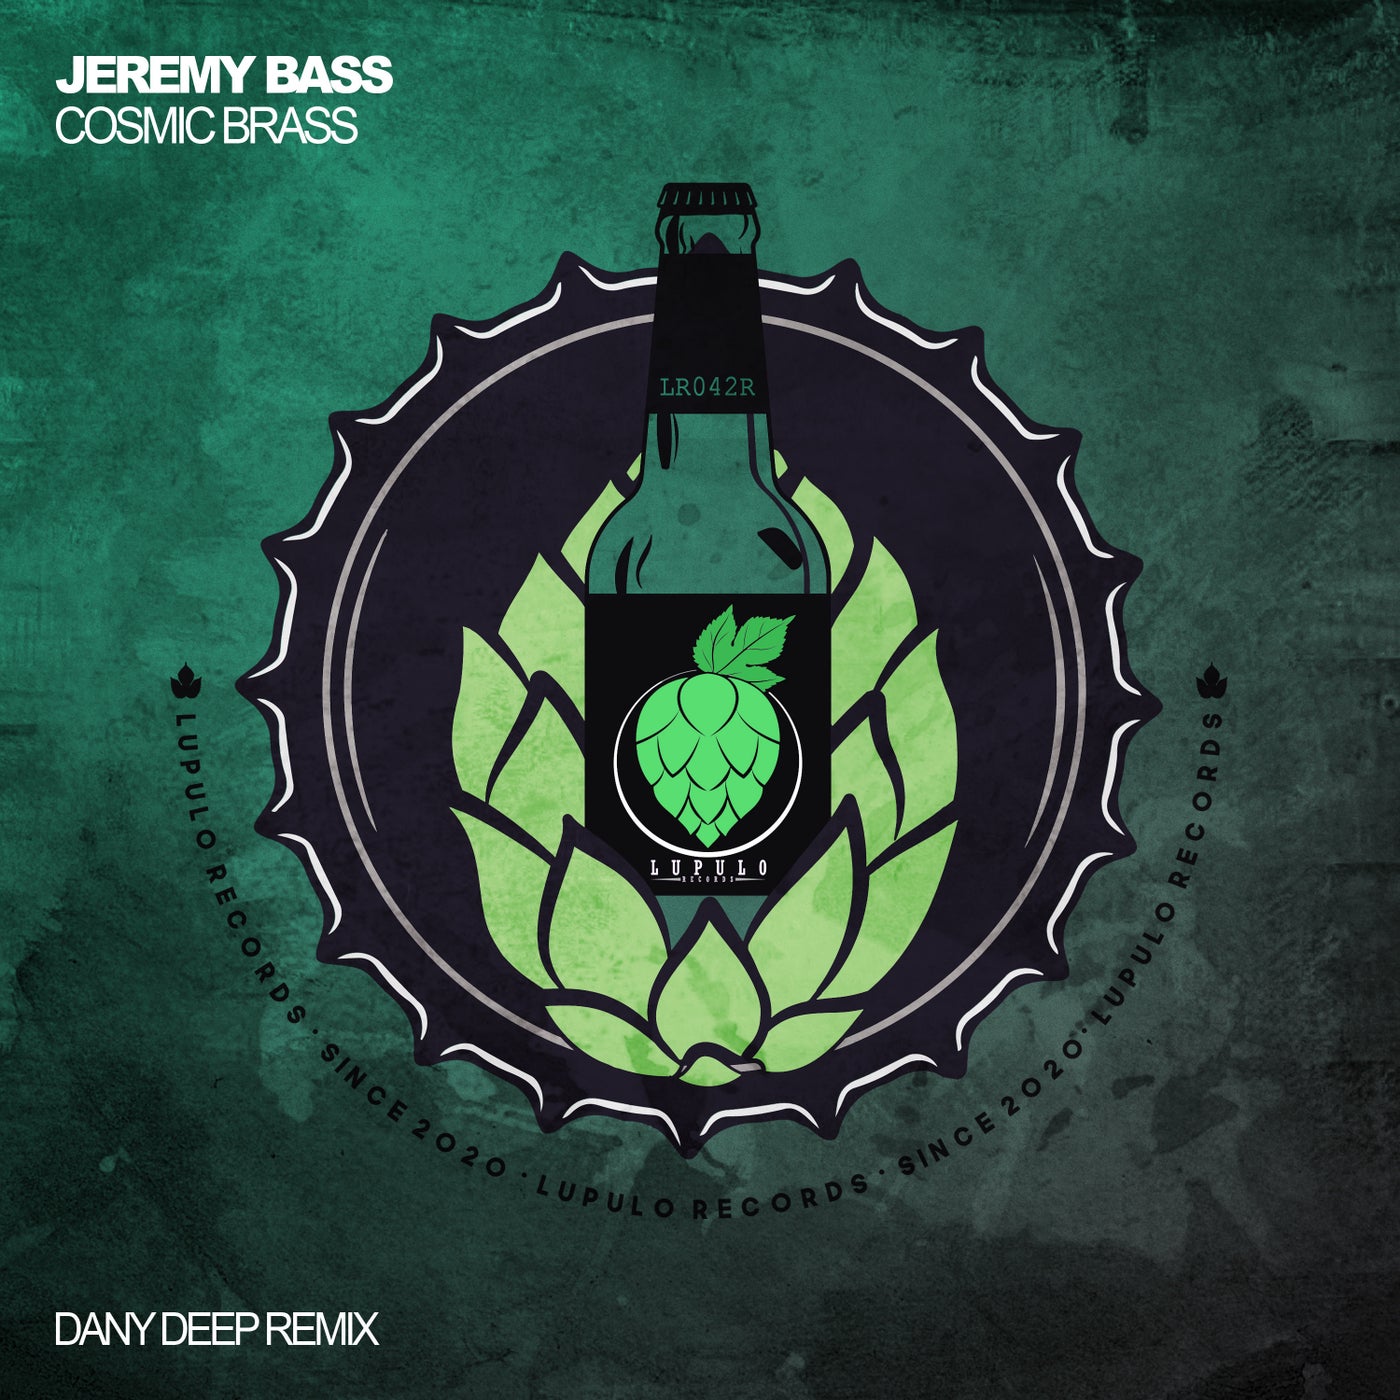 Cosmic Brass (Dany Deep Extended Remix)